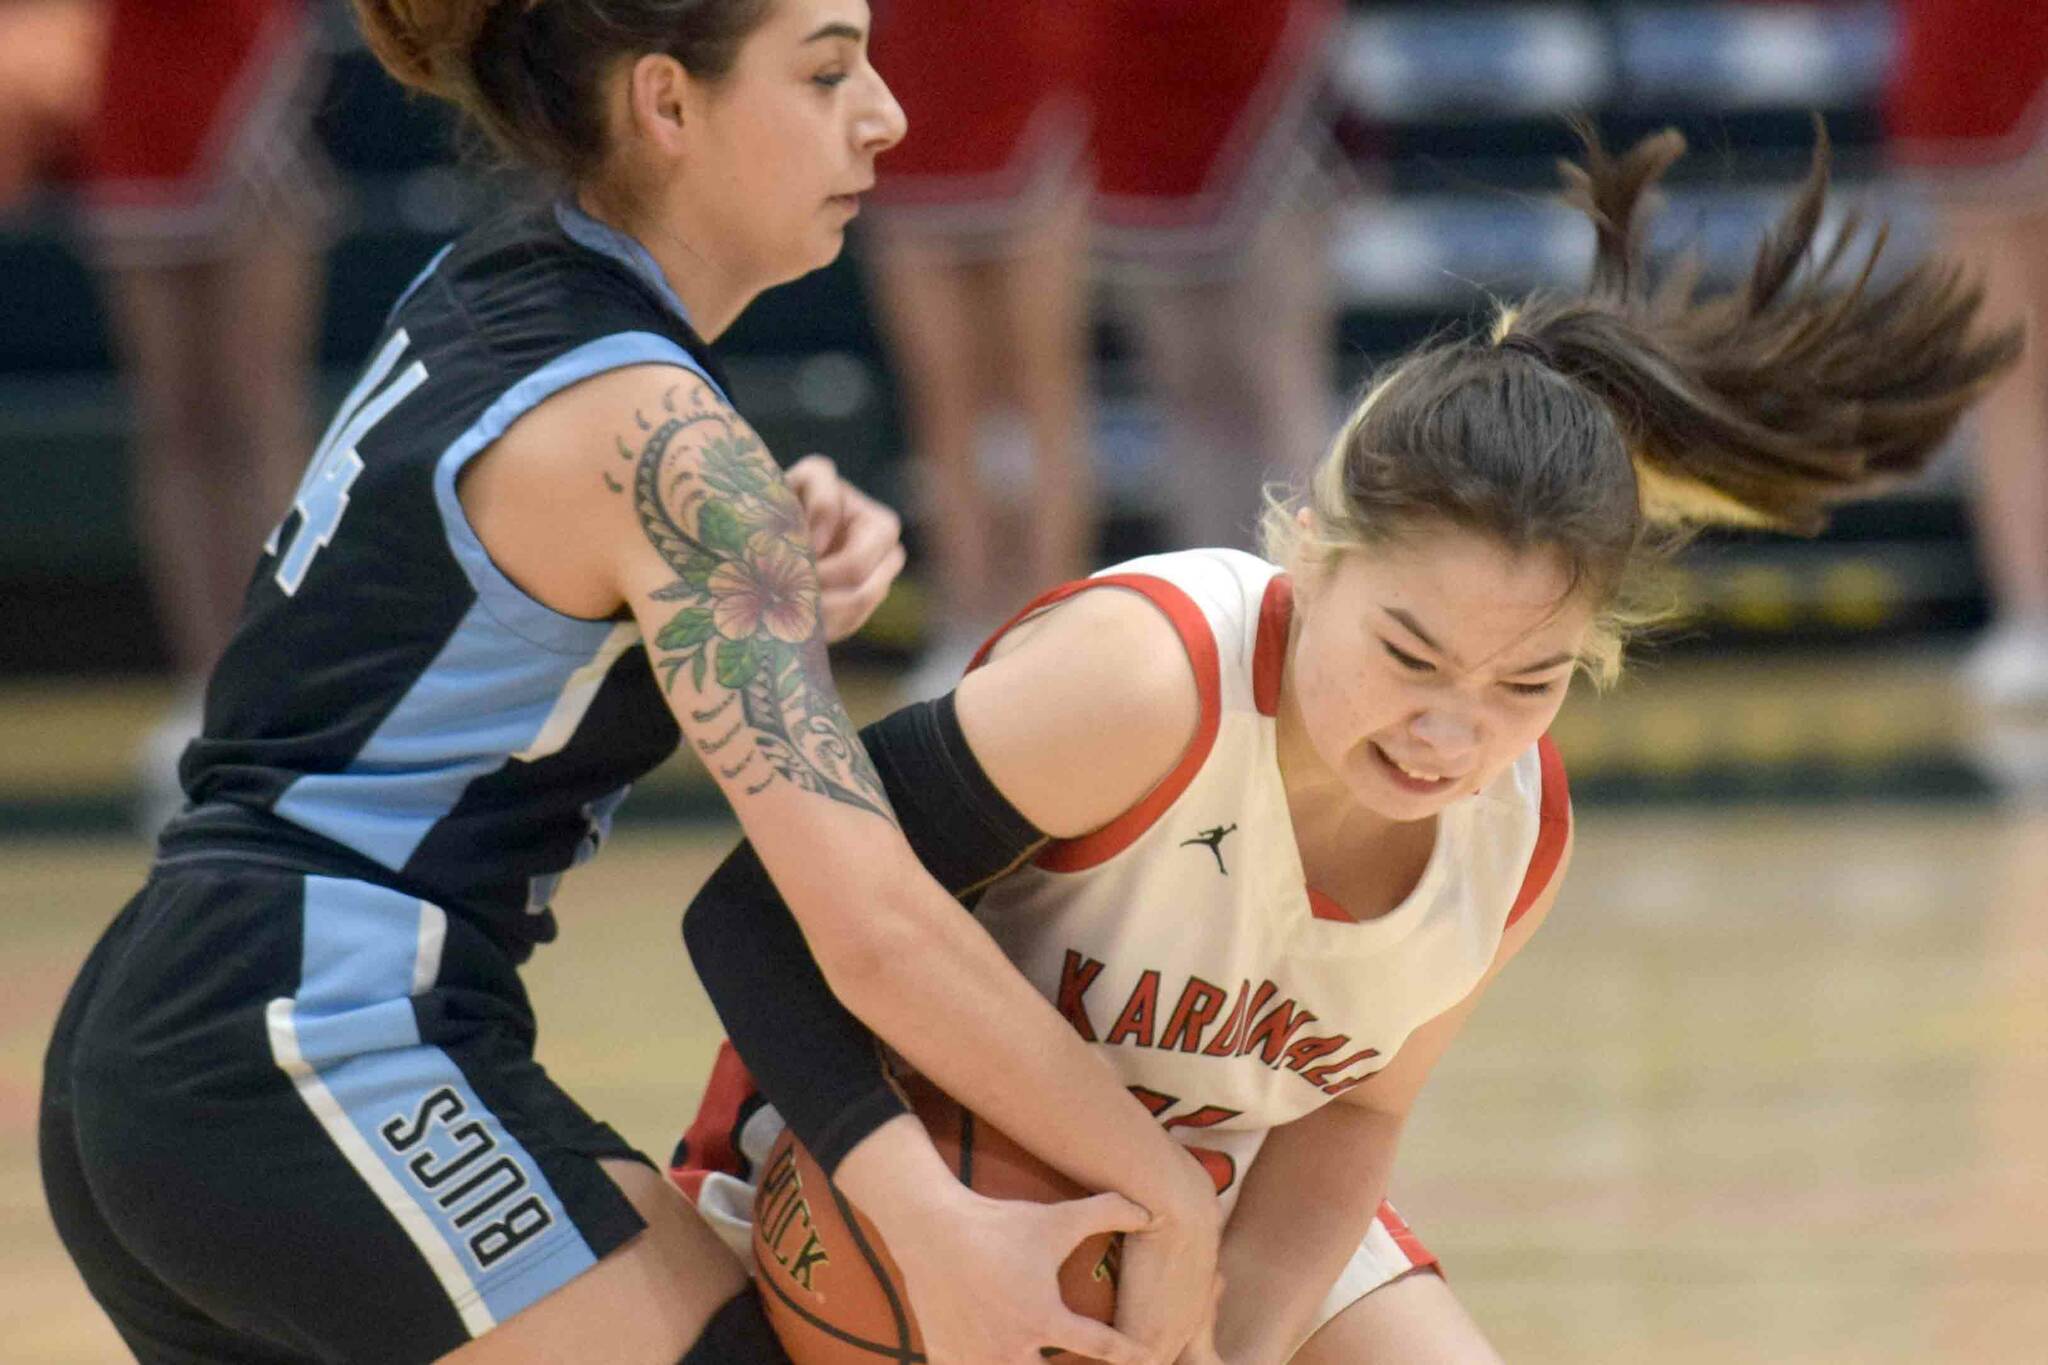 Kenai Central's Malerie Nunn fights for the ball against Valdez defender Kylie Gilbert during the Class 3A girls basketball fourth-place semifinals at the Alaska Airlines Center in Anchorage, Alaska, on Thursday, March 24, 2022. (Camille Botello/Peninsula Clarion)